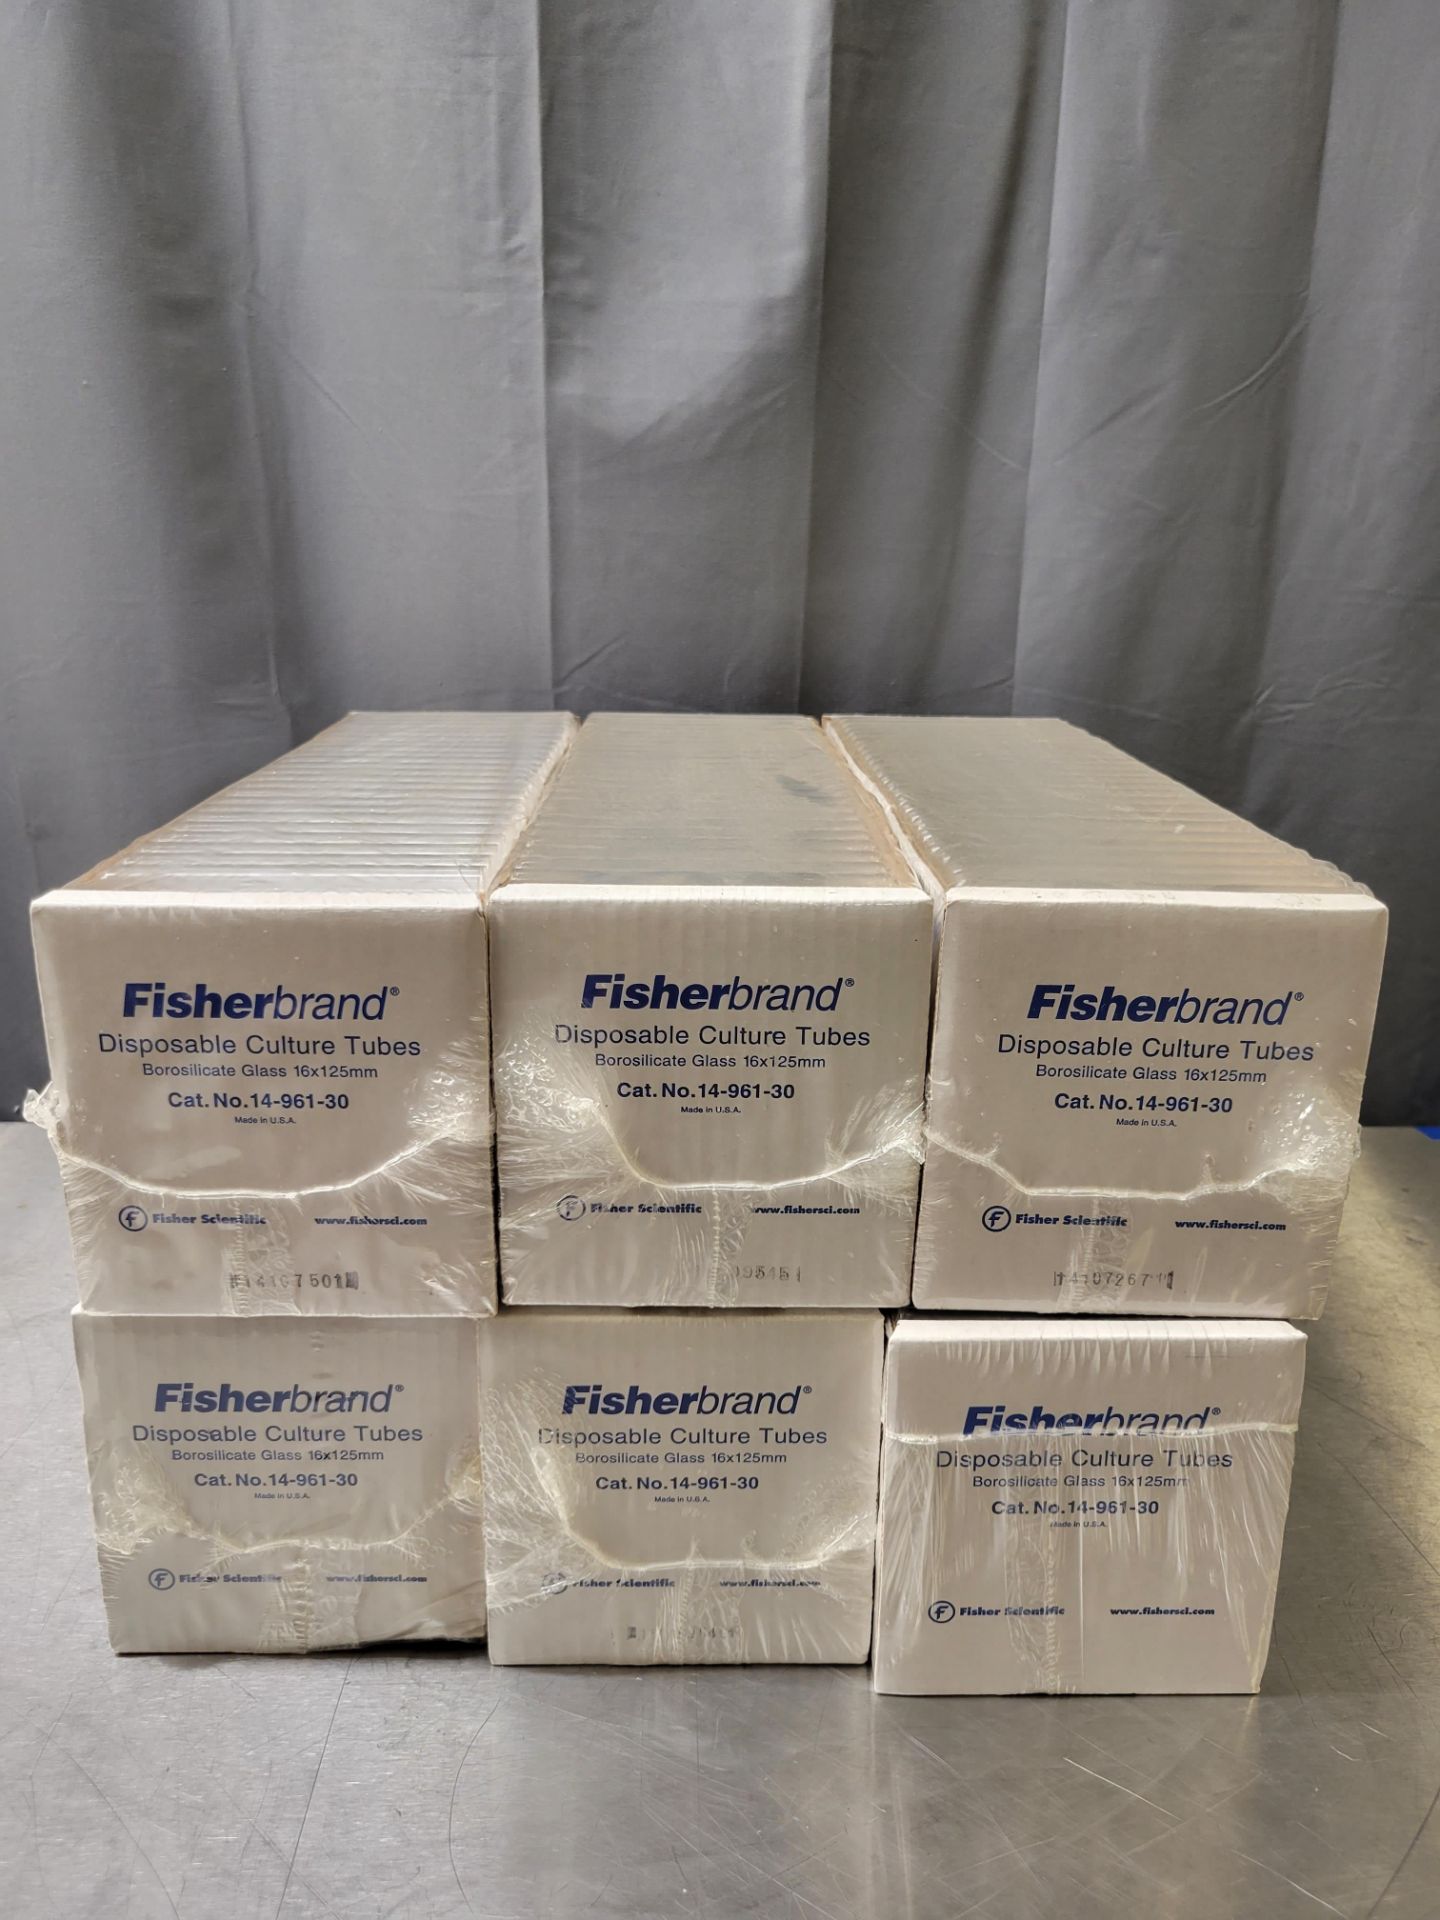 (6) Fisher Scientific Fisherbrand Borosilicate Glass 16 x 125mm Disposable Culture Tubes Catalog #